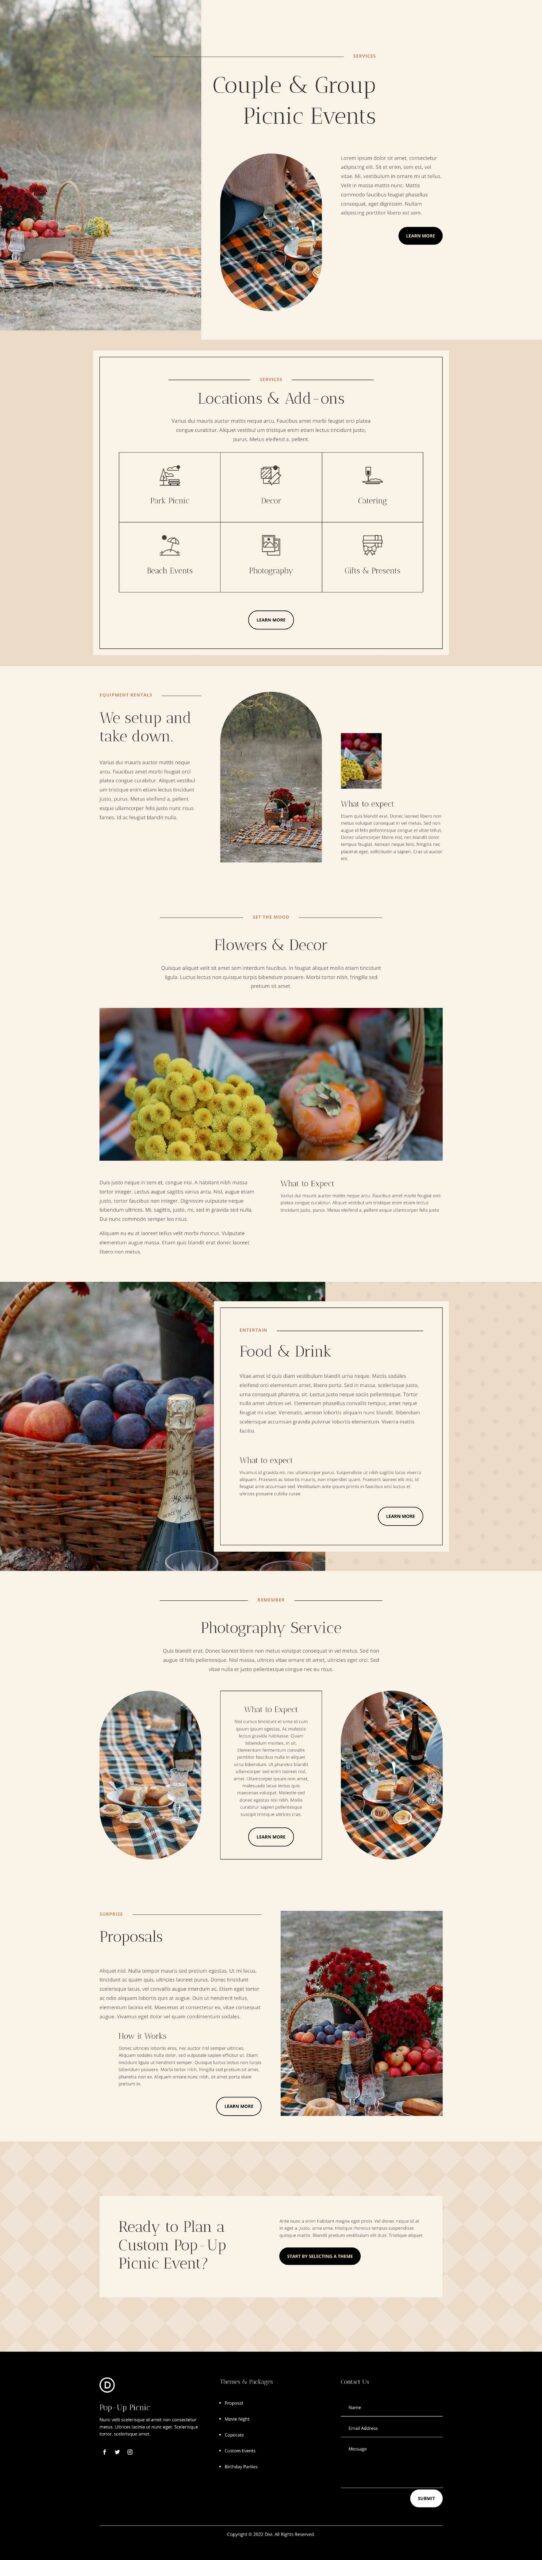 Popup Picnic Layout Pack for Divi